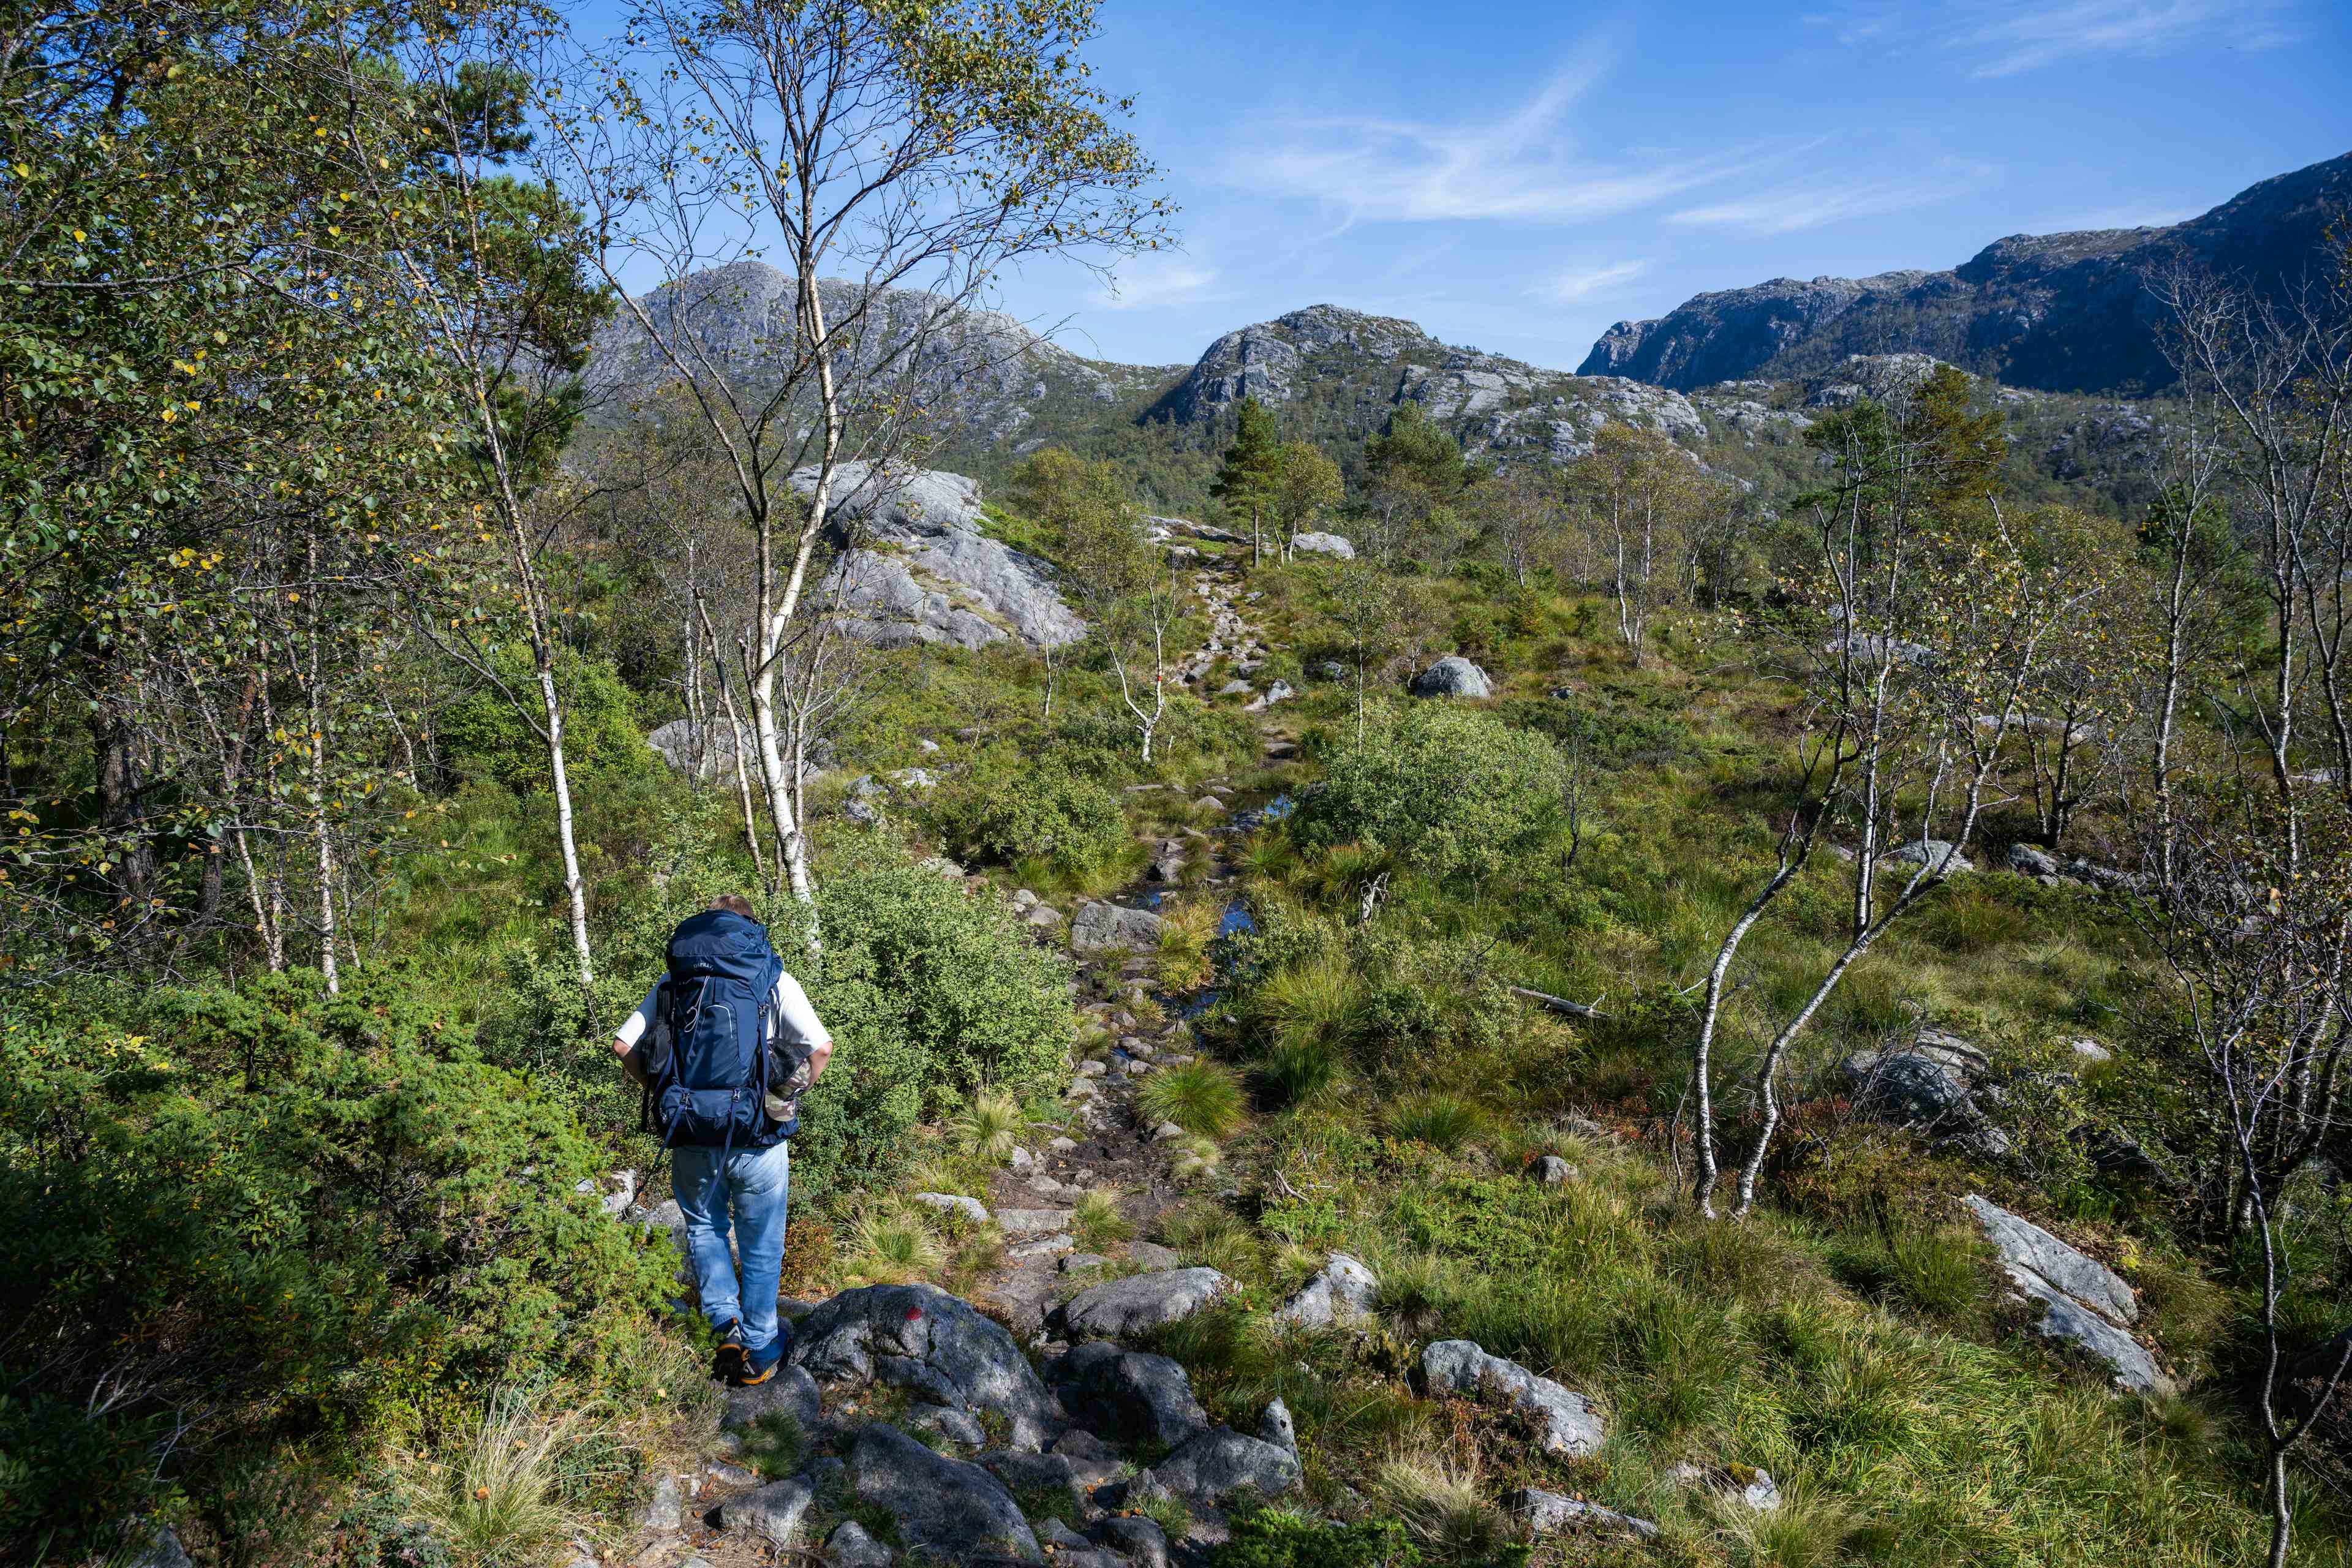 Nature views on a mountain hike with Stavanger Adventure guided hike to Reinaknuten